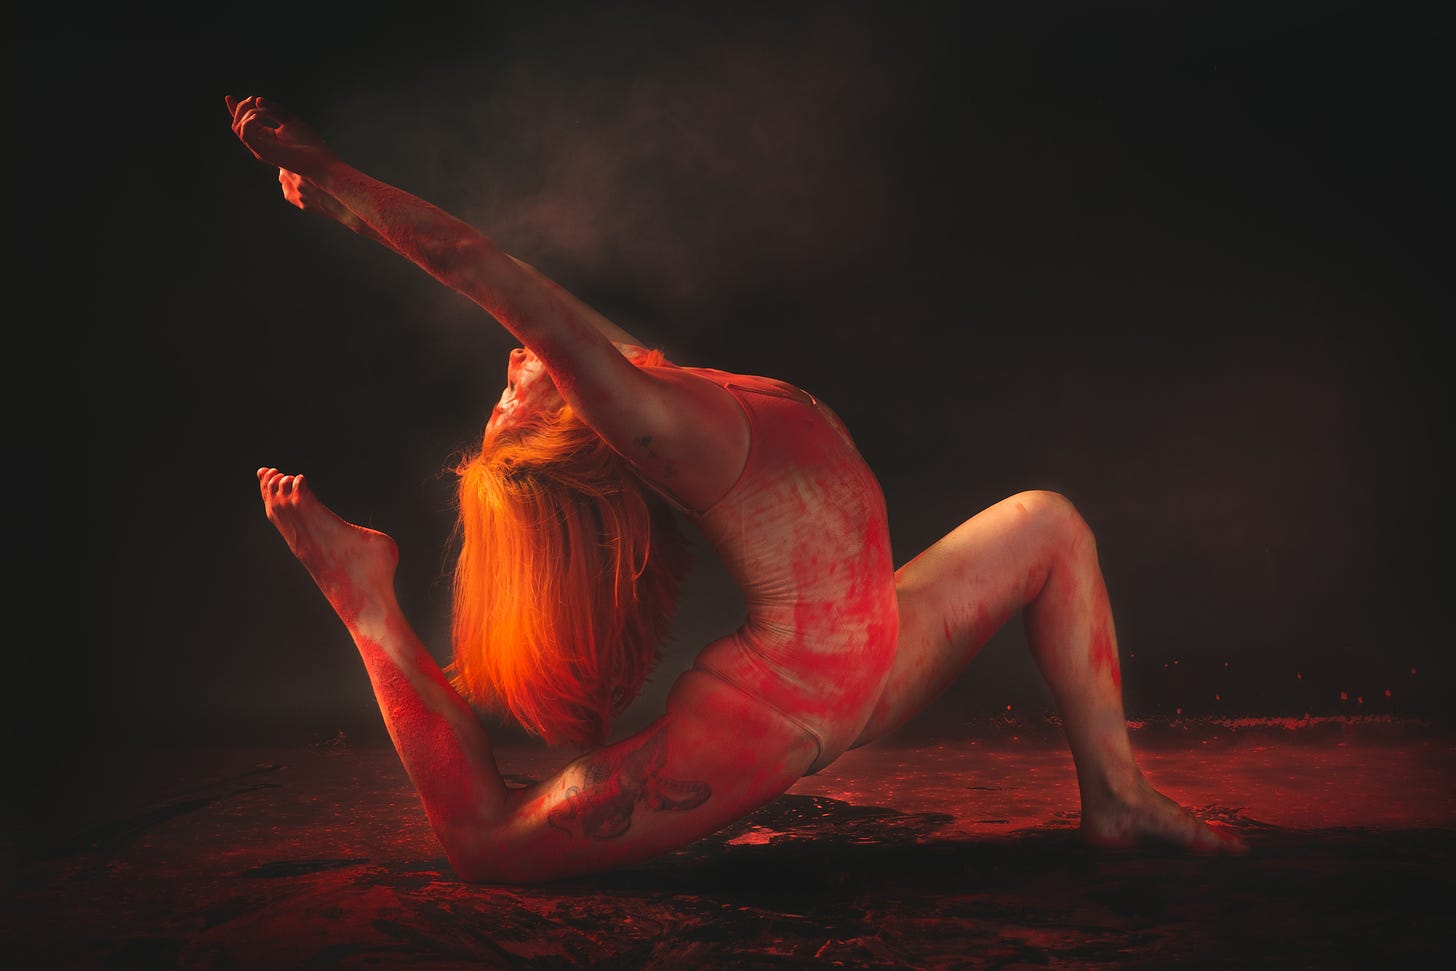 A red haired female acrobat covered in red pigment reached up to the sky from the earth.